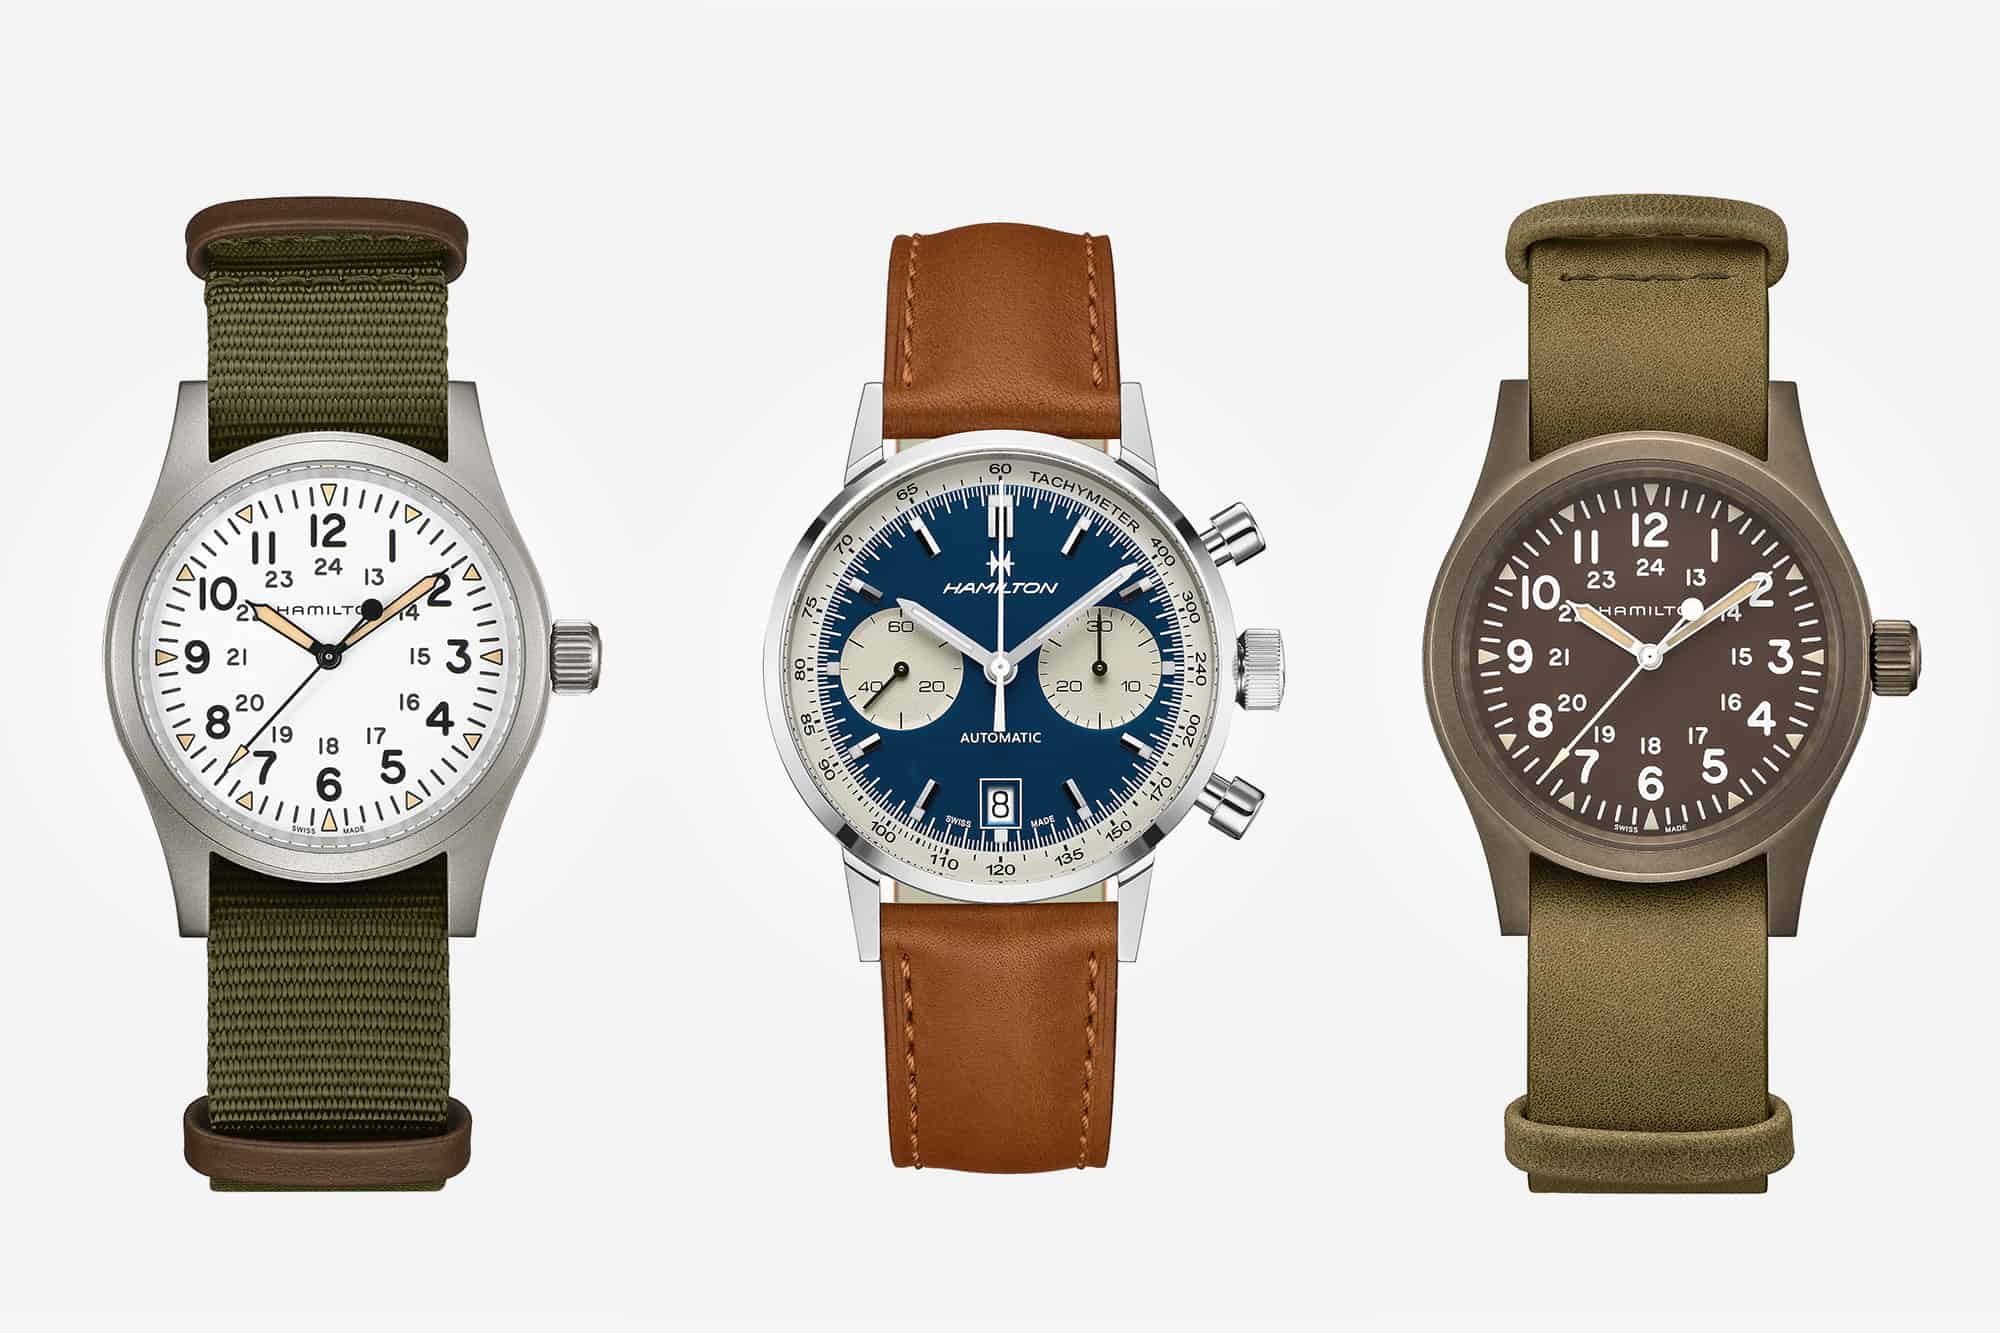 Introducing New Colors for the Hamilton Khaki Field Mechanical and Intra-Matic Auto Chrono